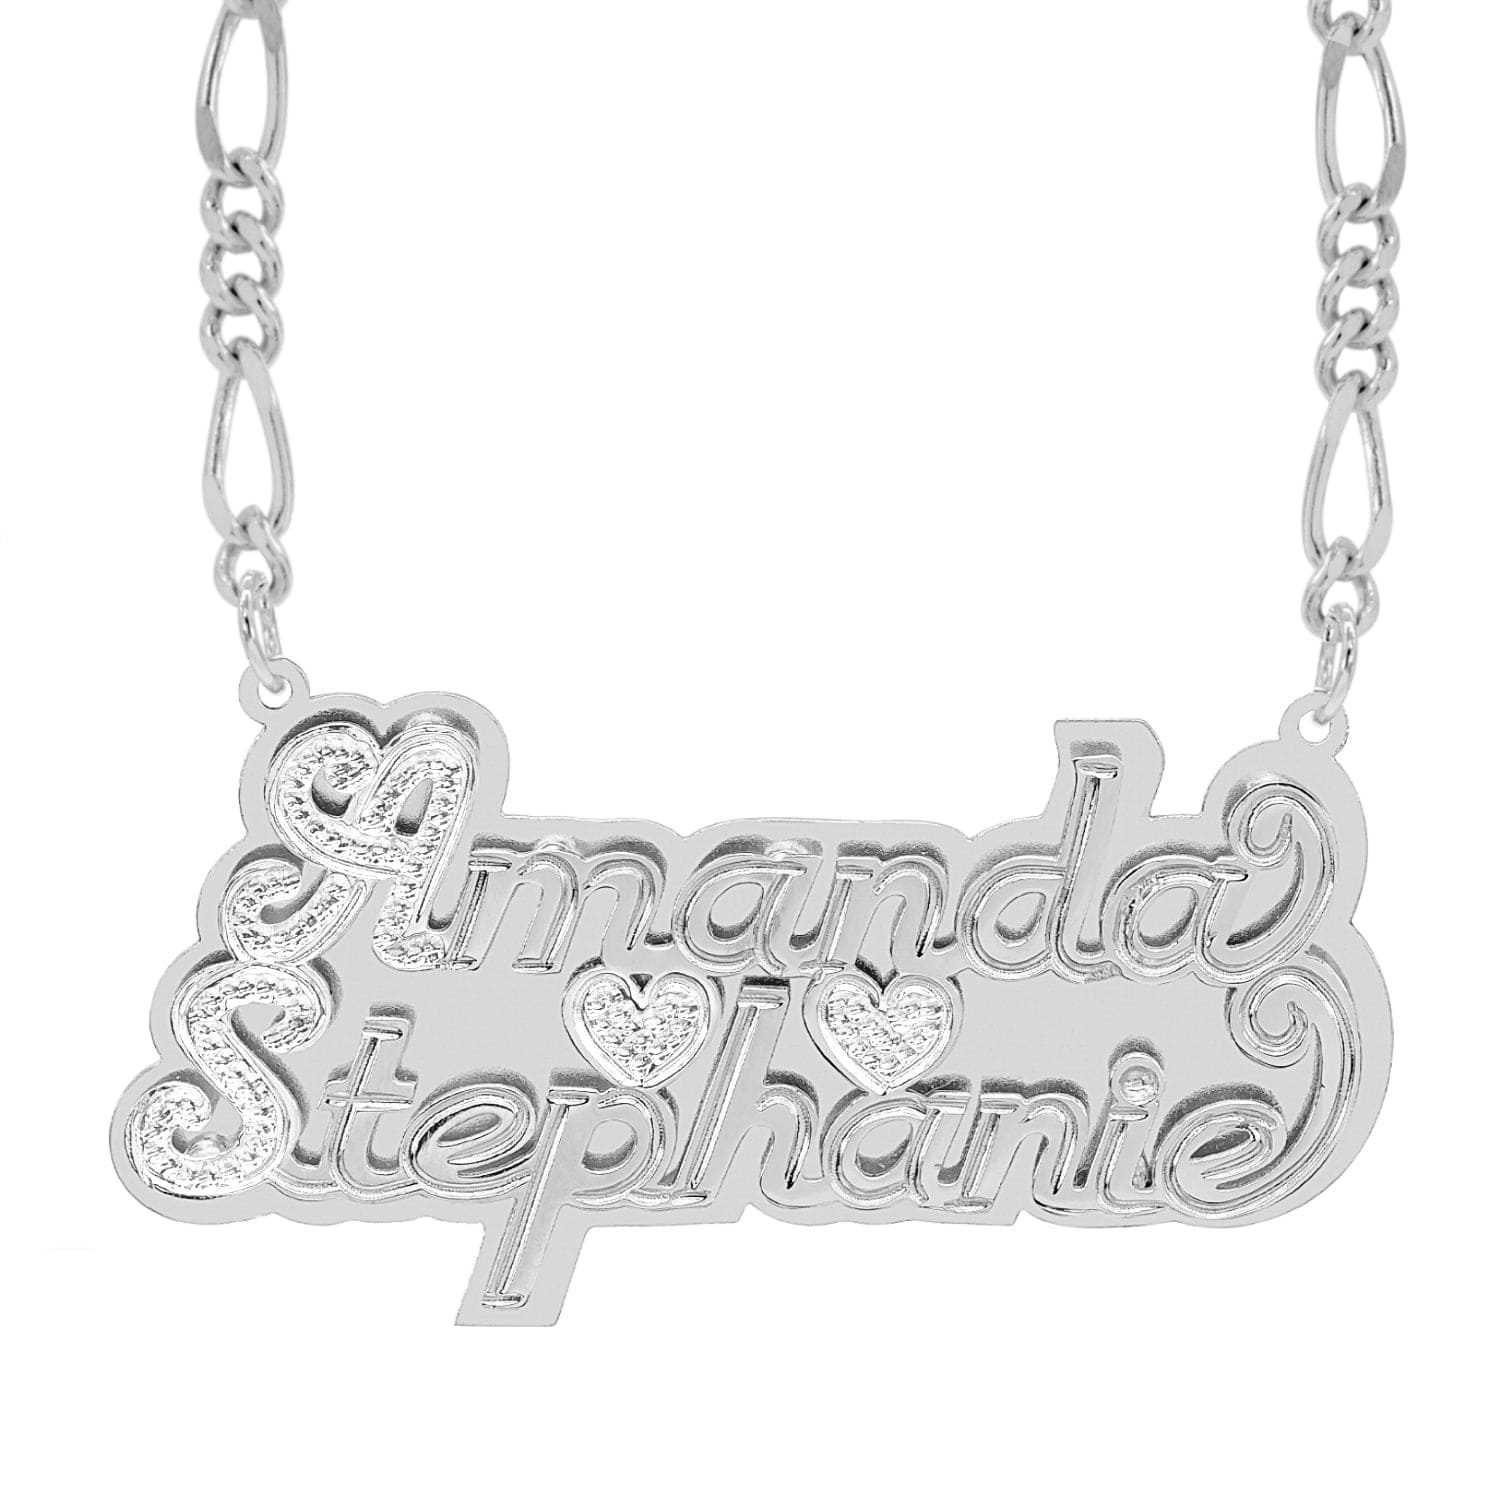 14k Gold over Sterling Silver / Figaro Chain Copy of Double Plated Nameplate Necklace "Couples"